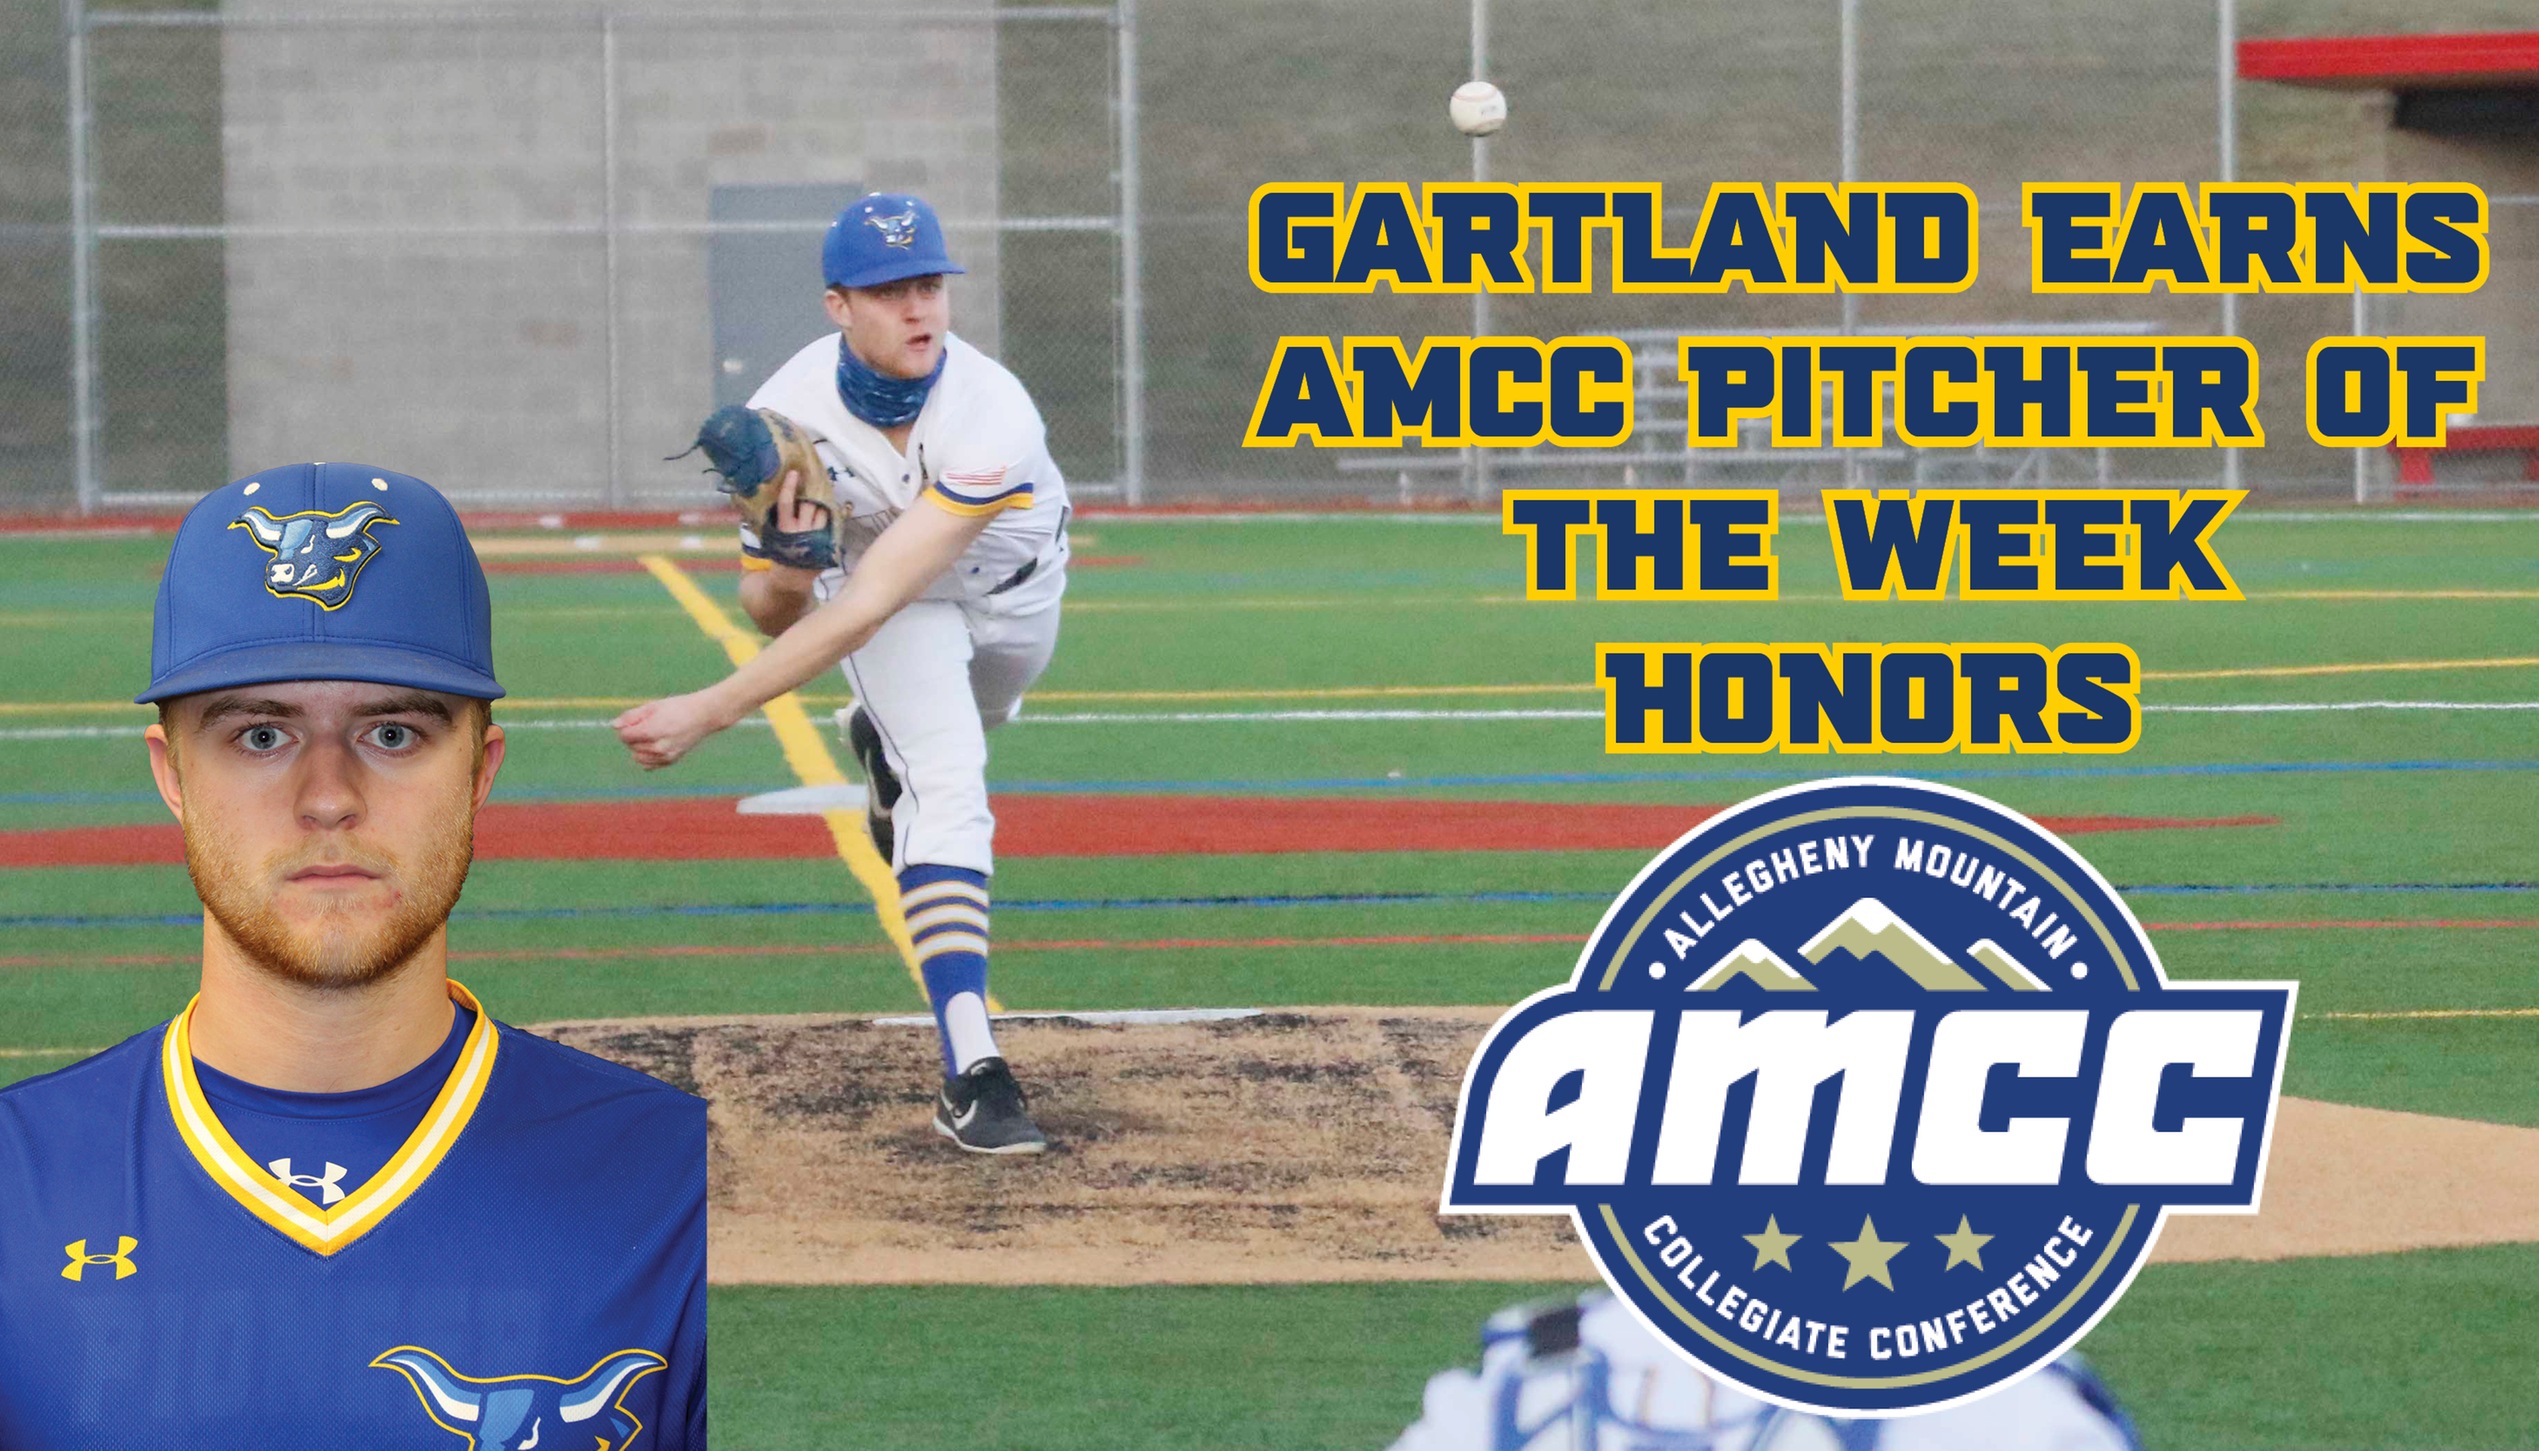 AJ Gartland delivers a pitch - he was named AMCC Pitcher of the Week after leading the Pioneers to a victory on opening day.